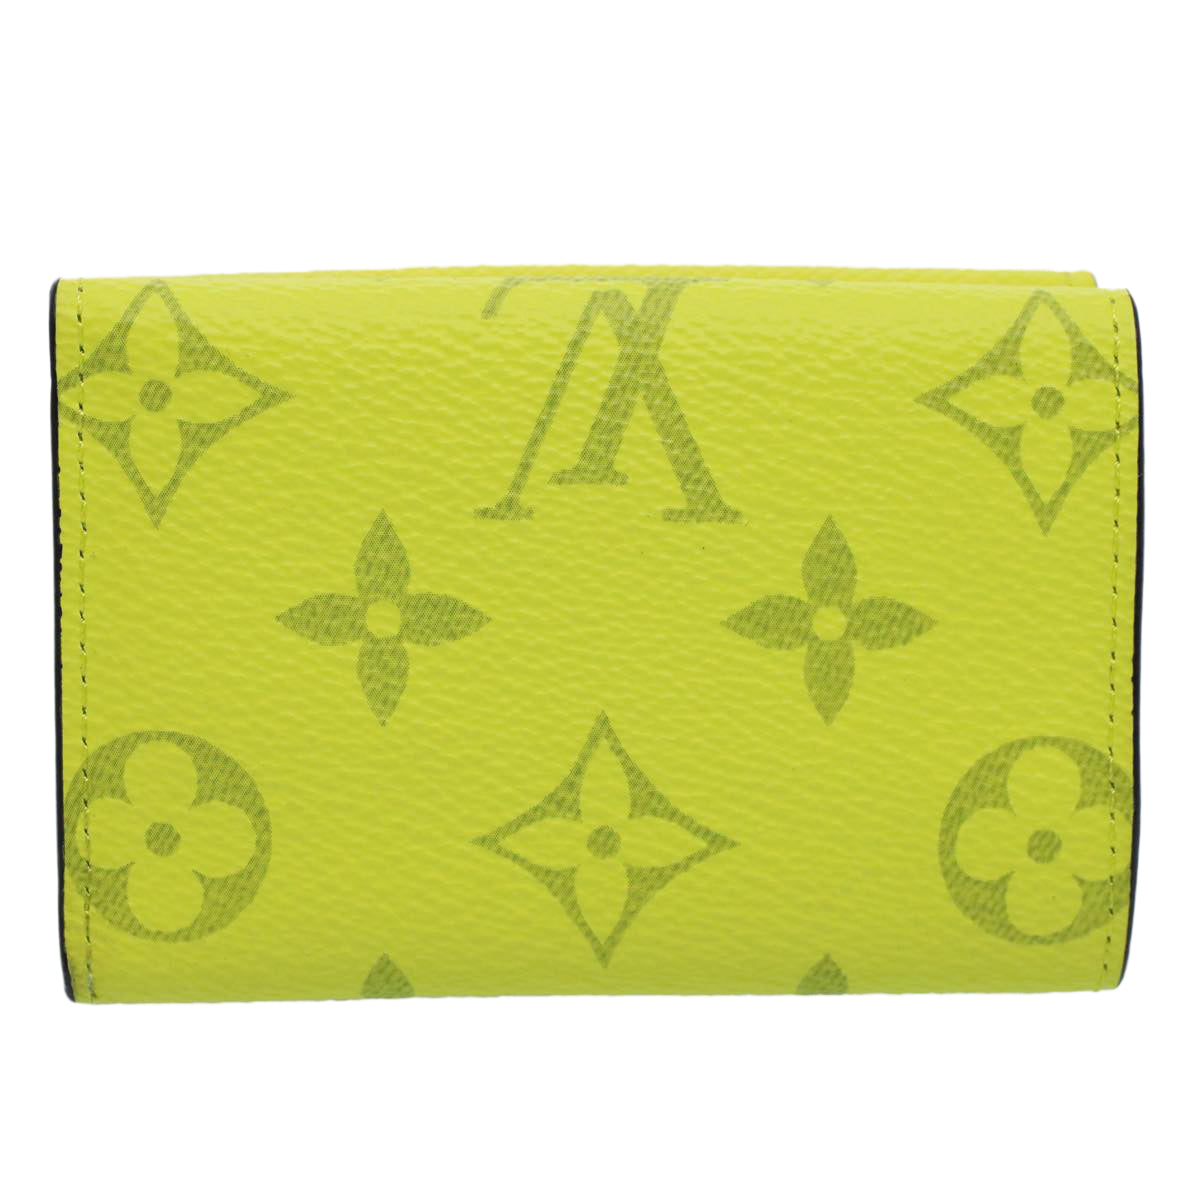 LOUIS VUITTON Taigalama Discovery Compact Wallet Jaune M67629 LV Auth ac2214 - 0